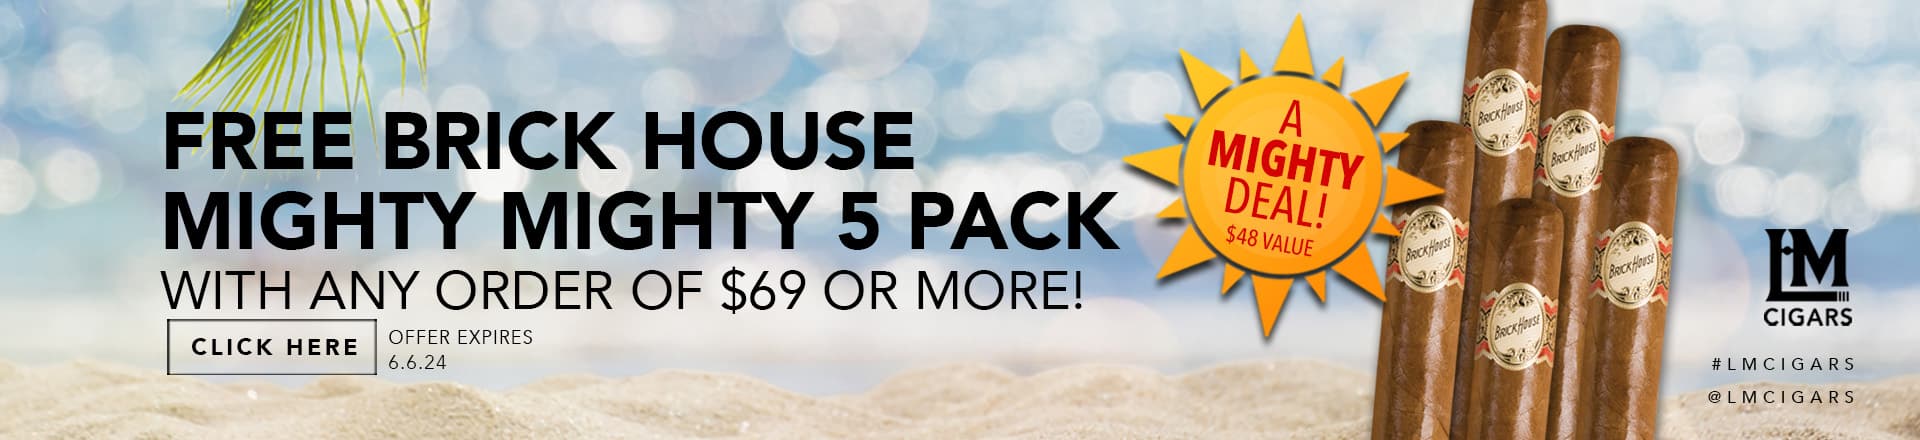 brick house mighty mighty 5 pack free with orders over $69